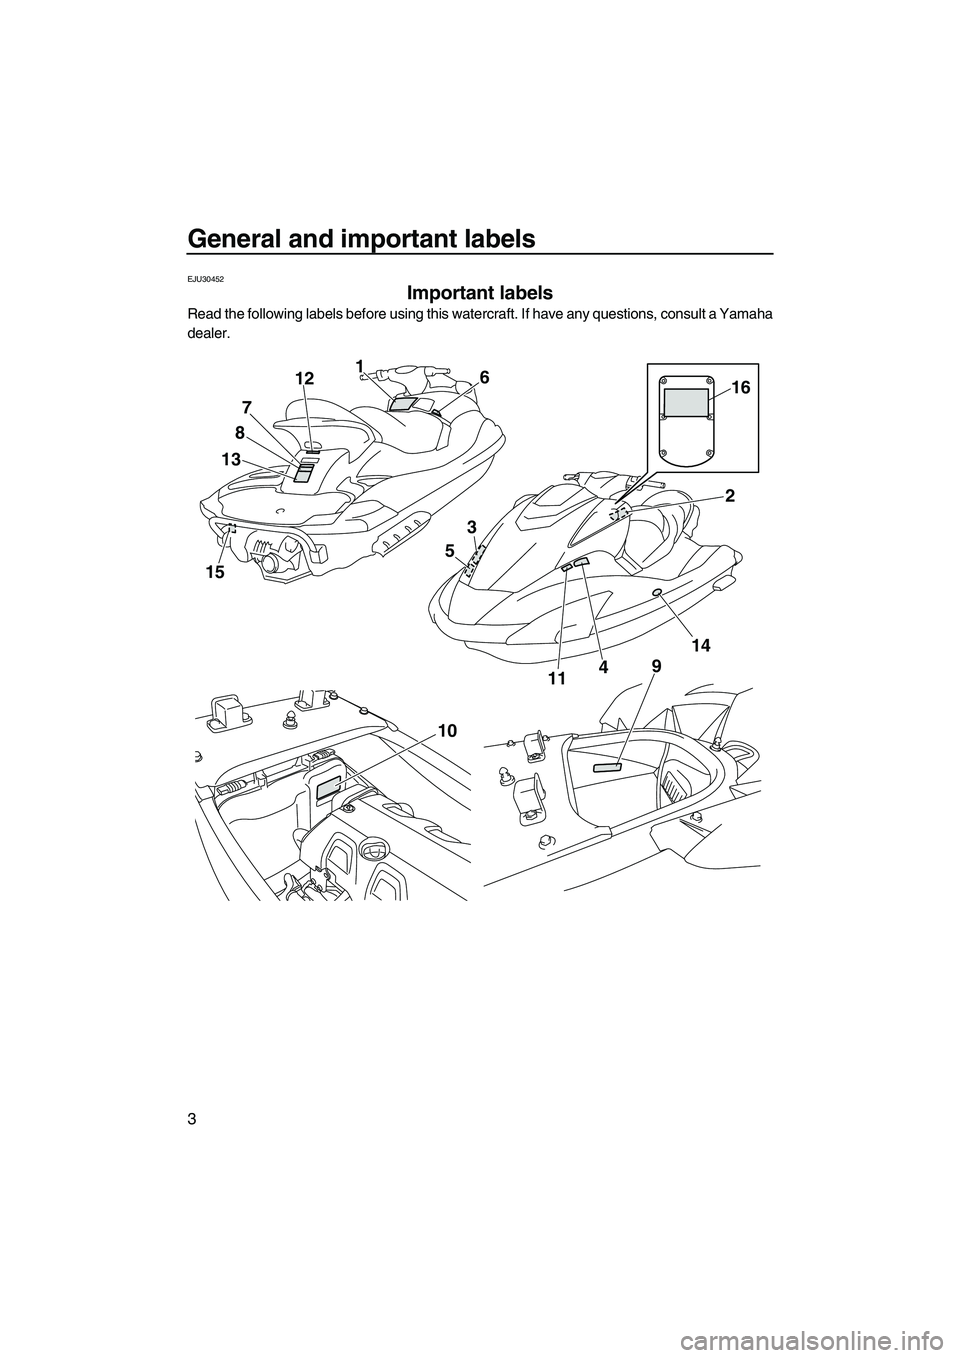 YAMAHA FX HO CRUISER 2010  Owners Manual General and important labels
3
EJU30452
Important labels 
Read the following labels before using this watercraft. If have any questions, consult a Yamaha
dealer.
15
1387121
6
4
914216
3
511
10
UF2H71E